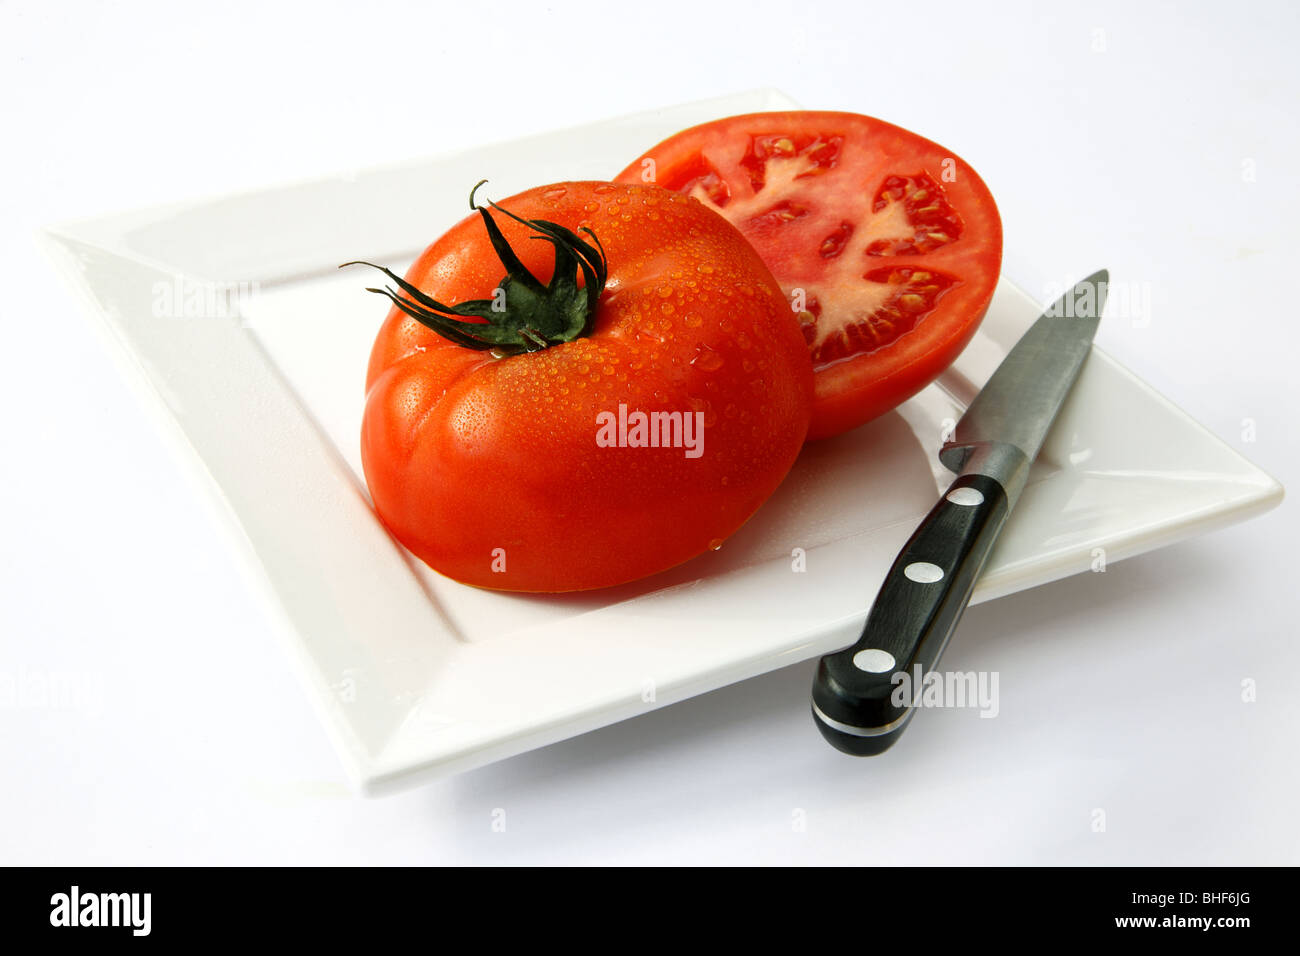 Large, fresh, red, ripe, juicy beef tomato cut into two halves on square white plate with kitchen knife, white background. Stock Photo